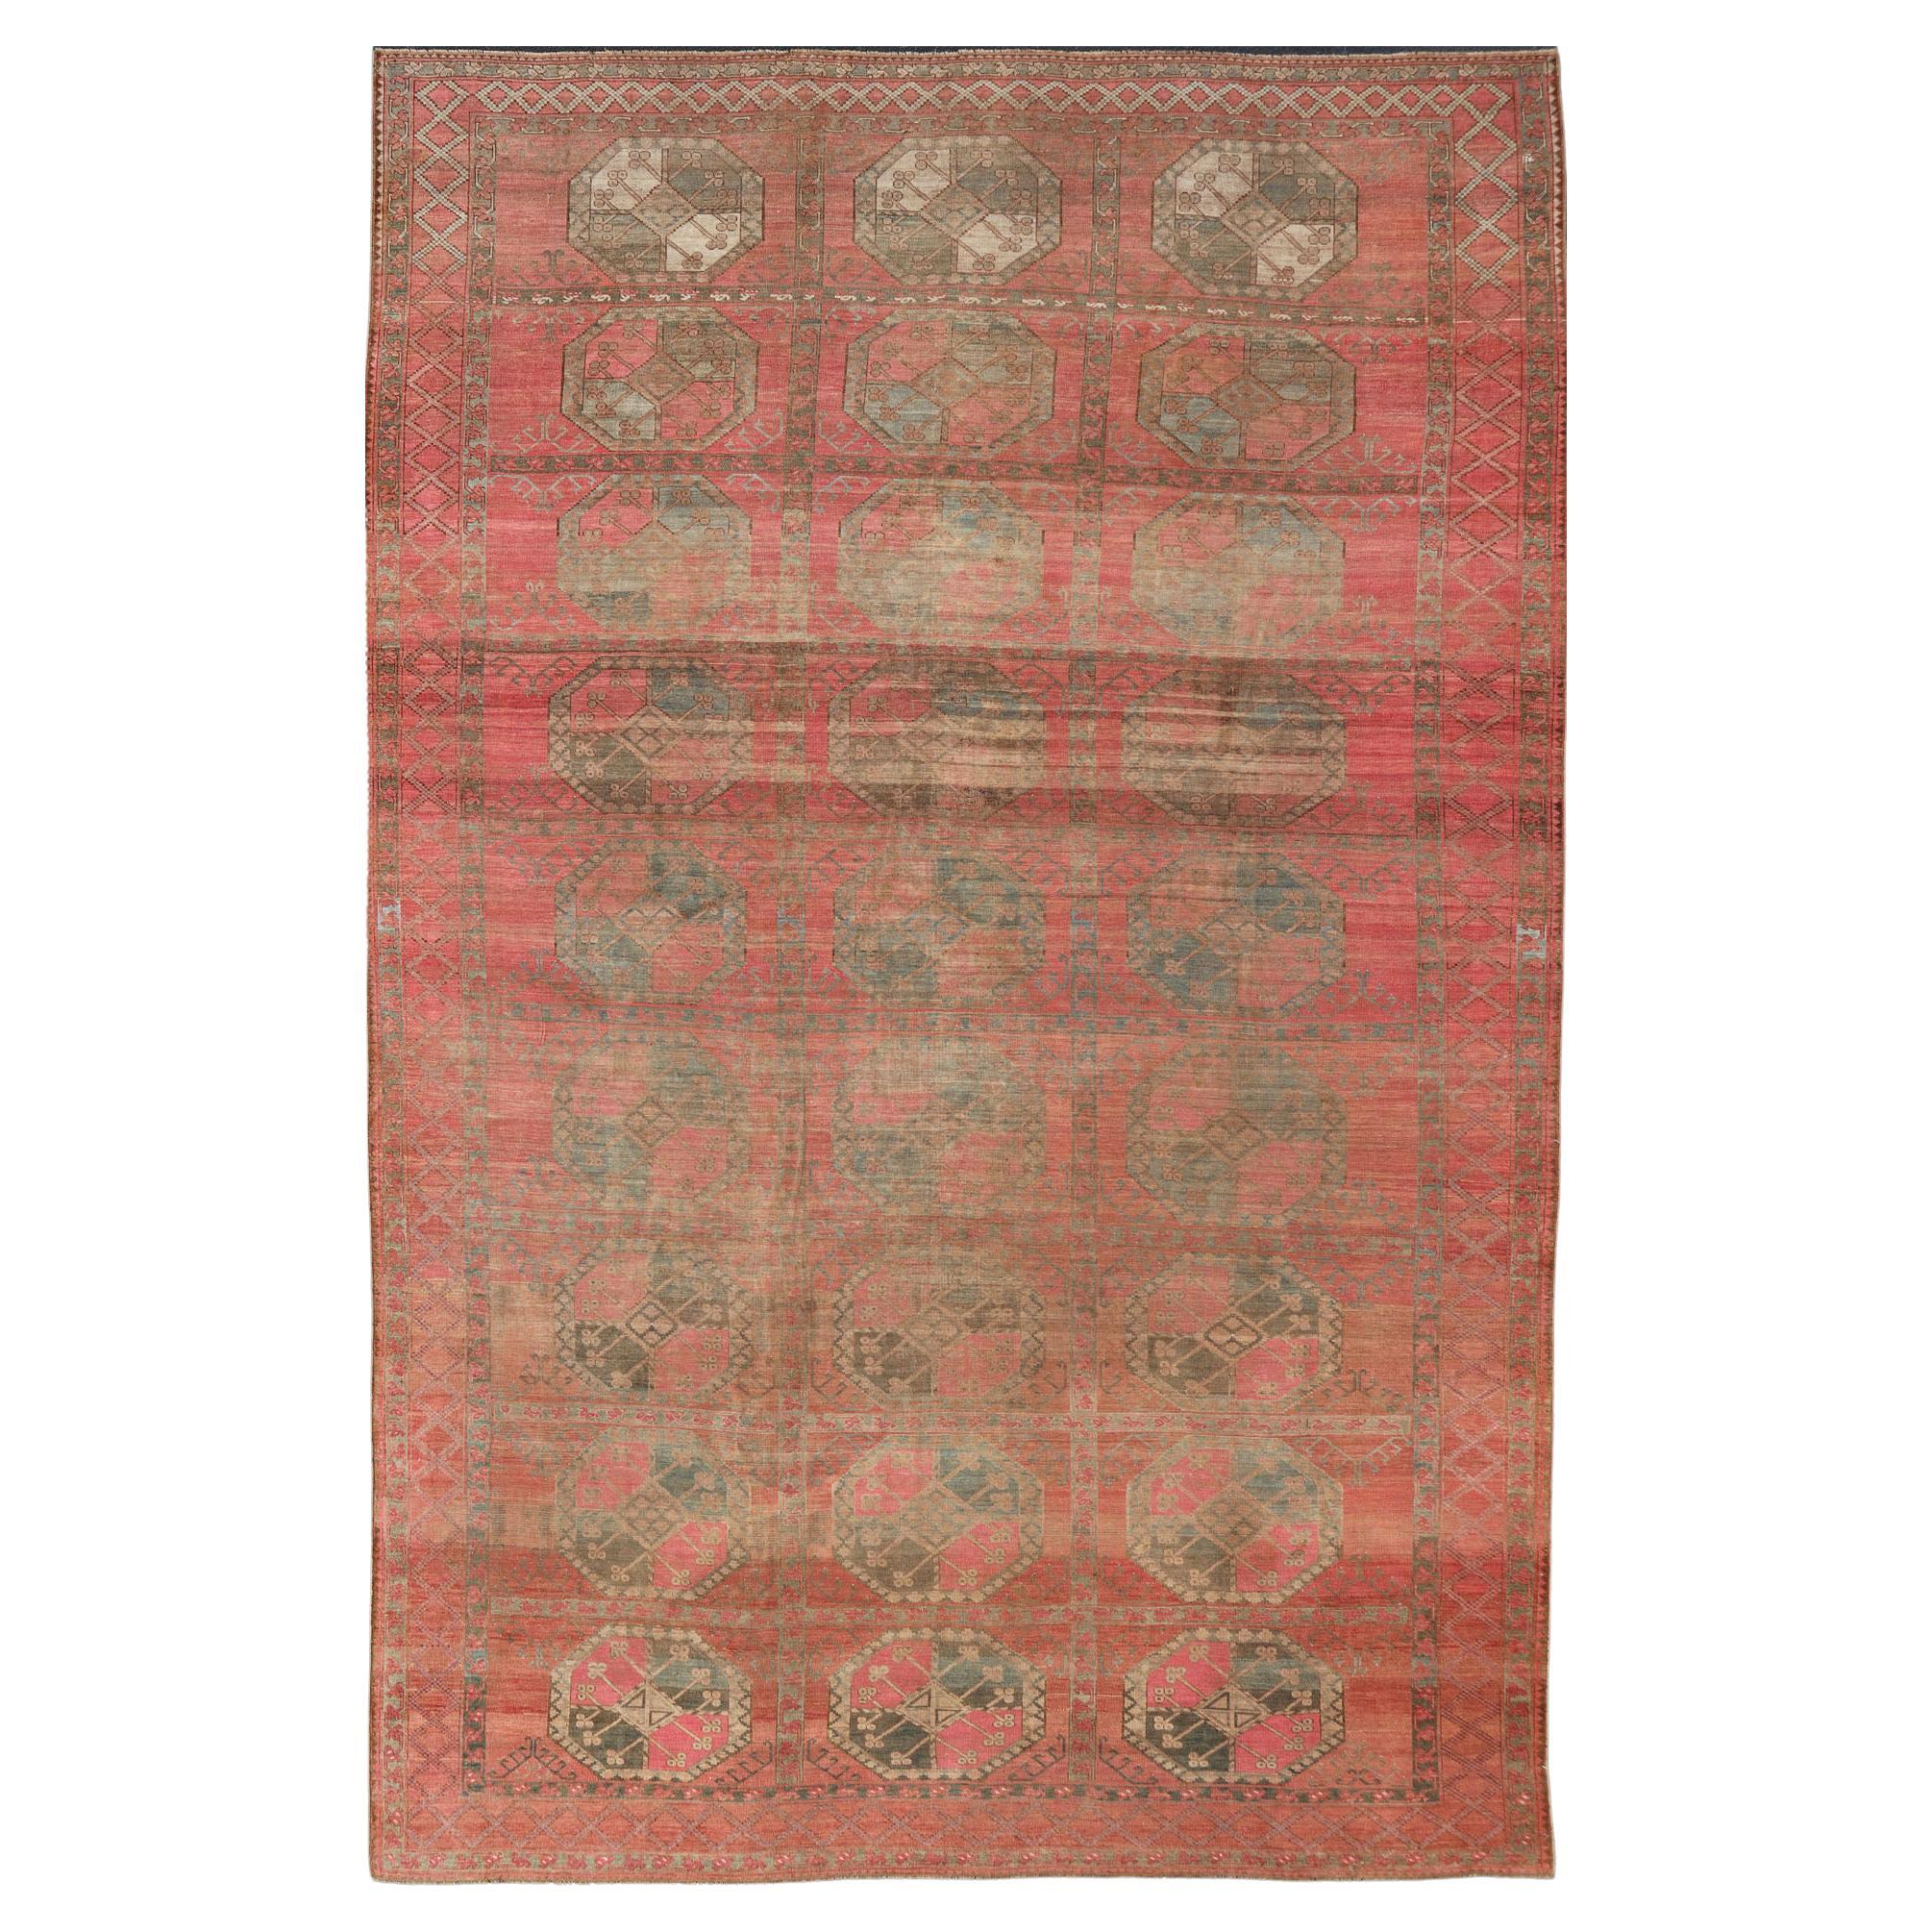 Large Turkomen Ersari Rug with All-Over Gul Design in Tan, Coral, and Brown For Sale